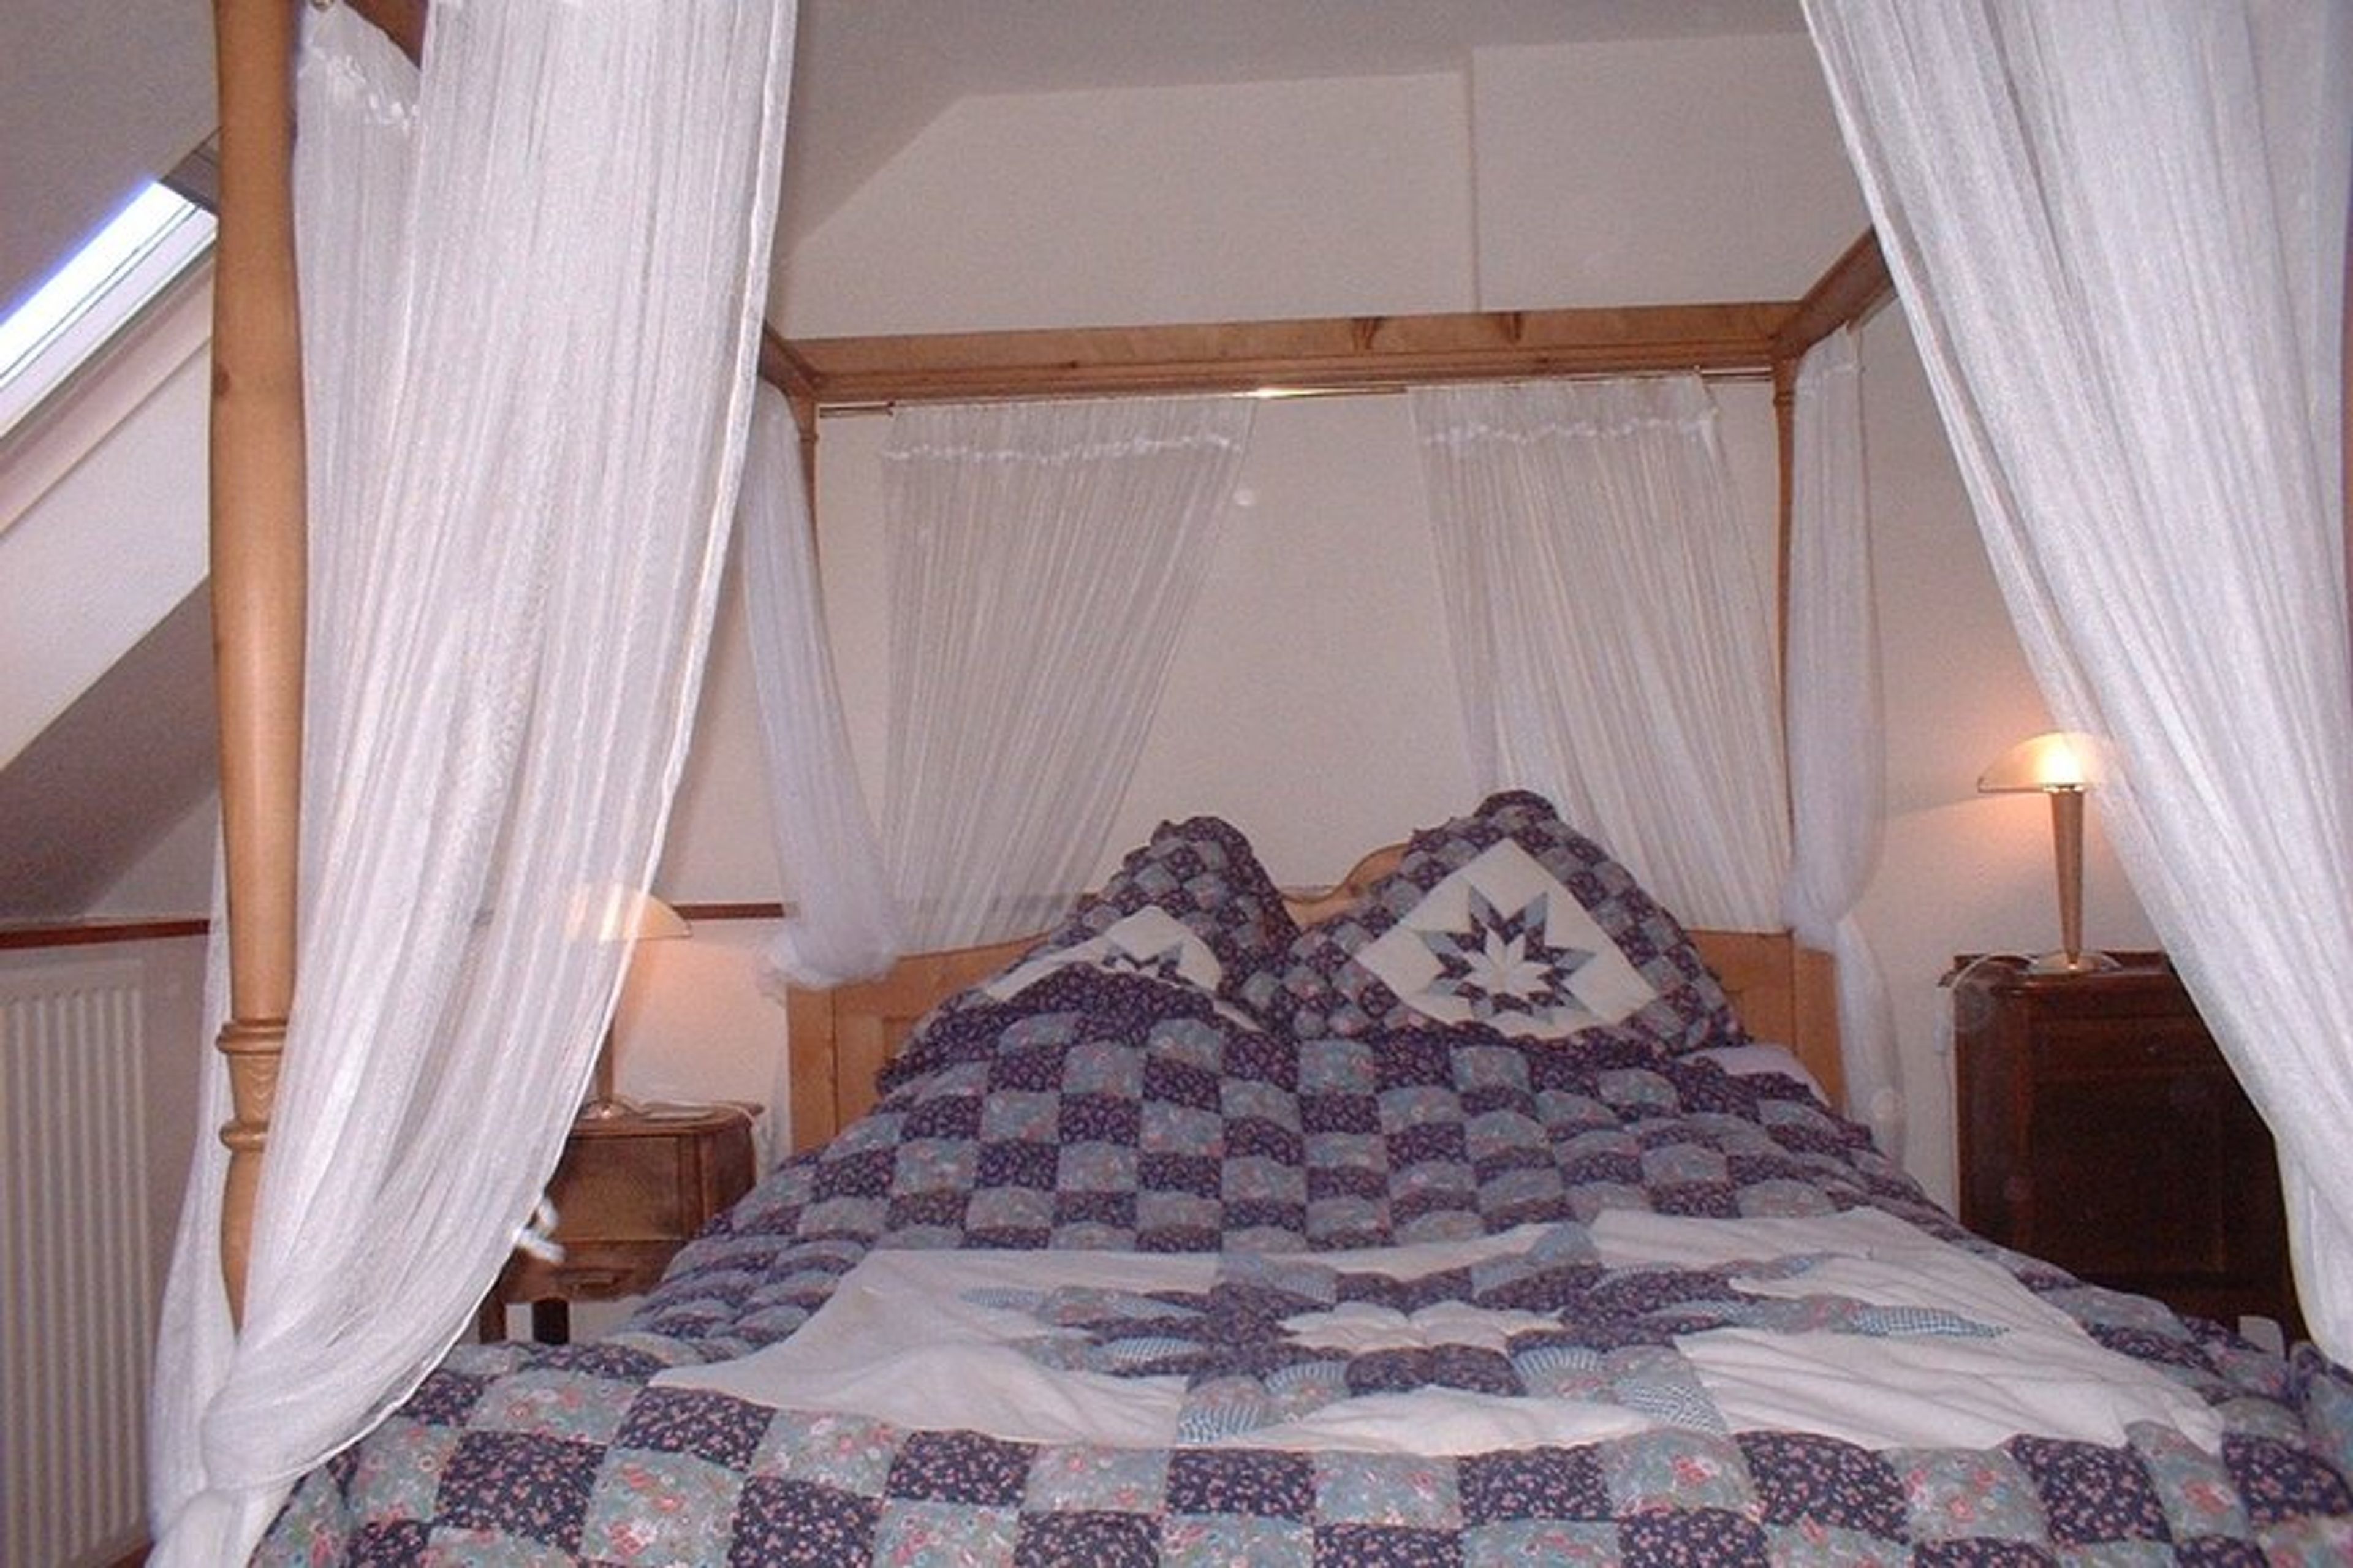 The master bedroom with four poster bed